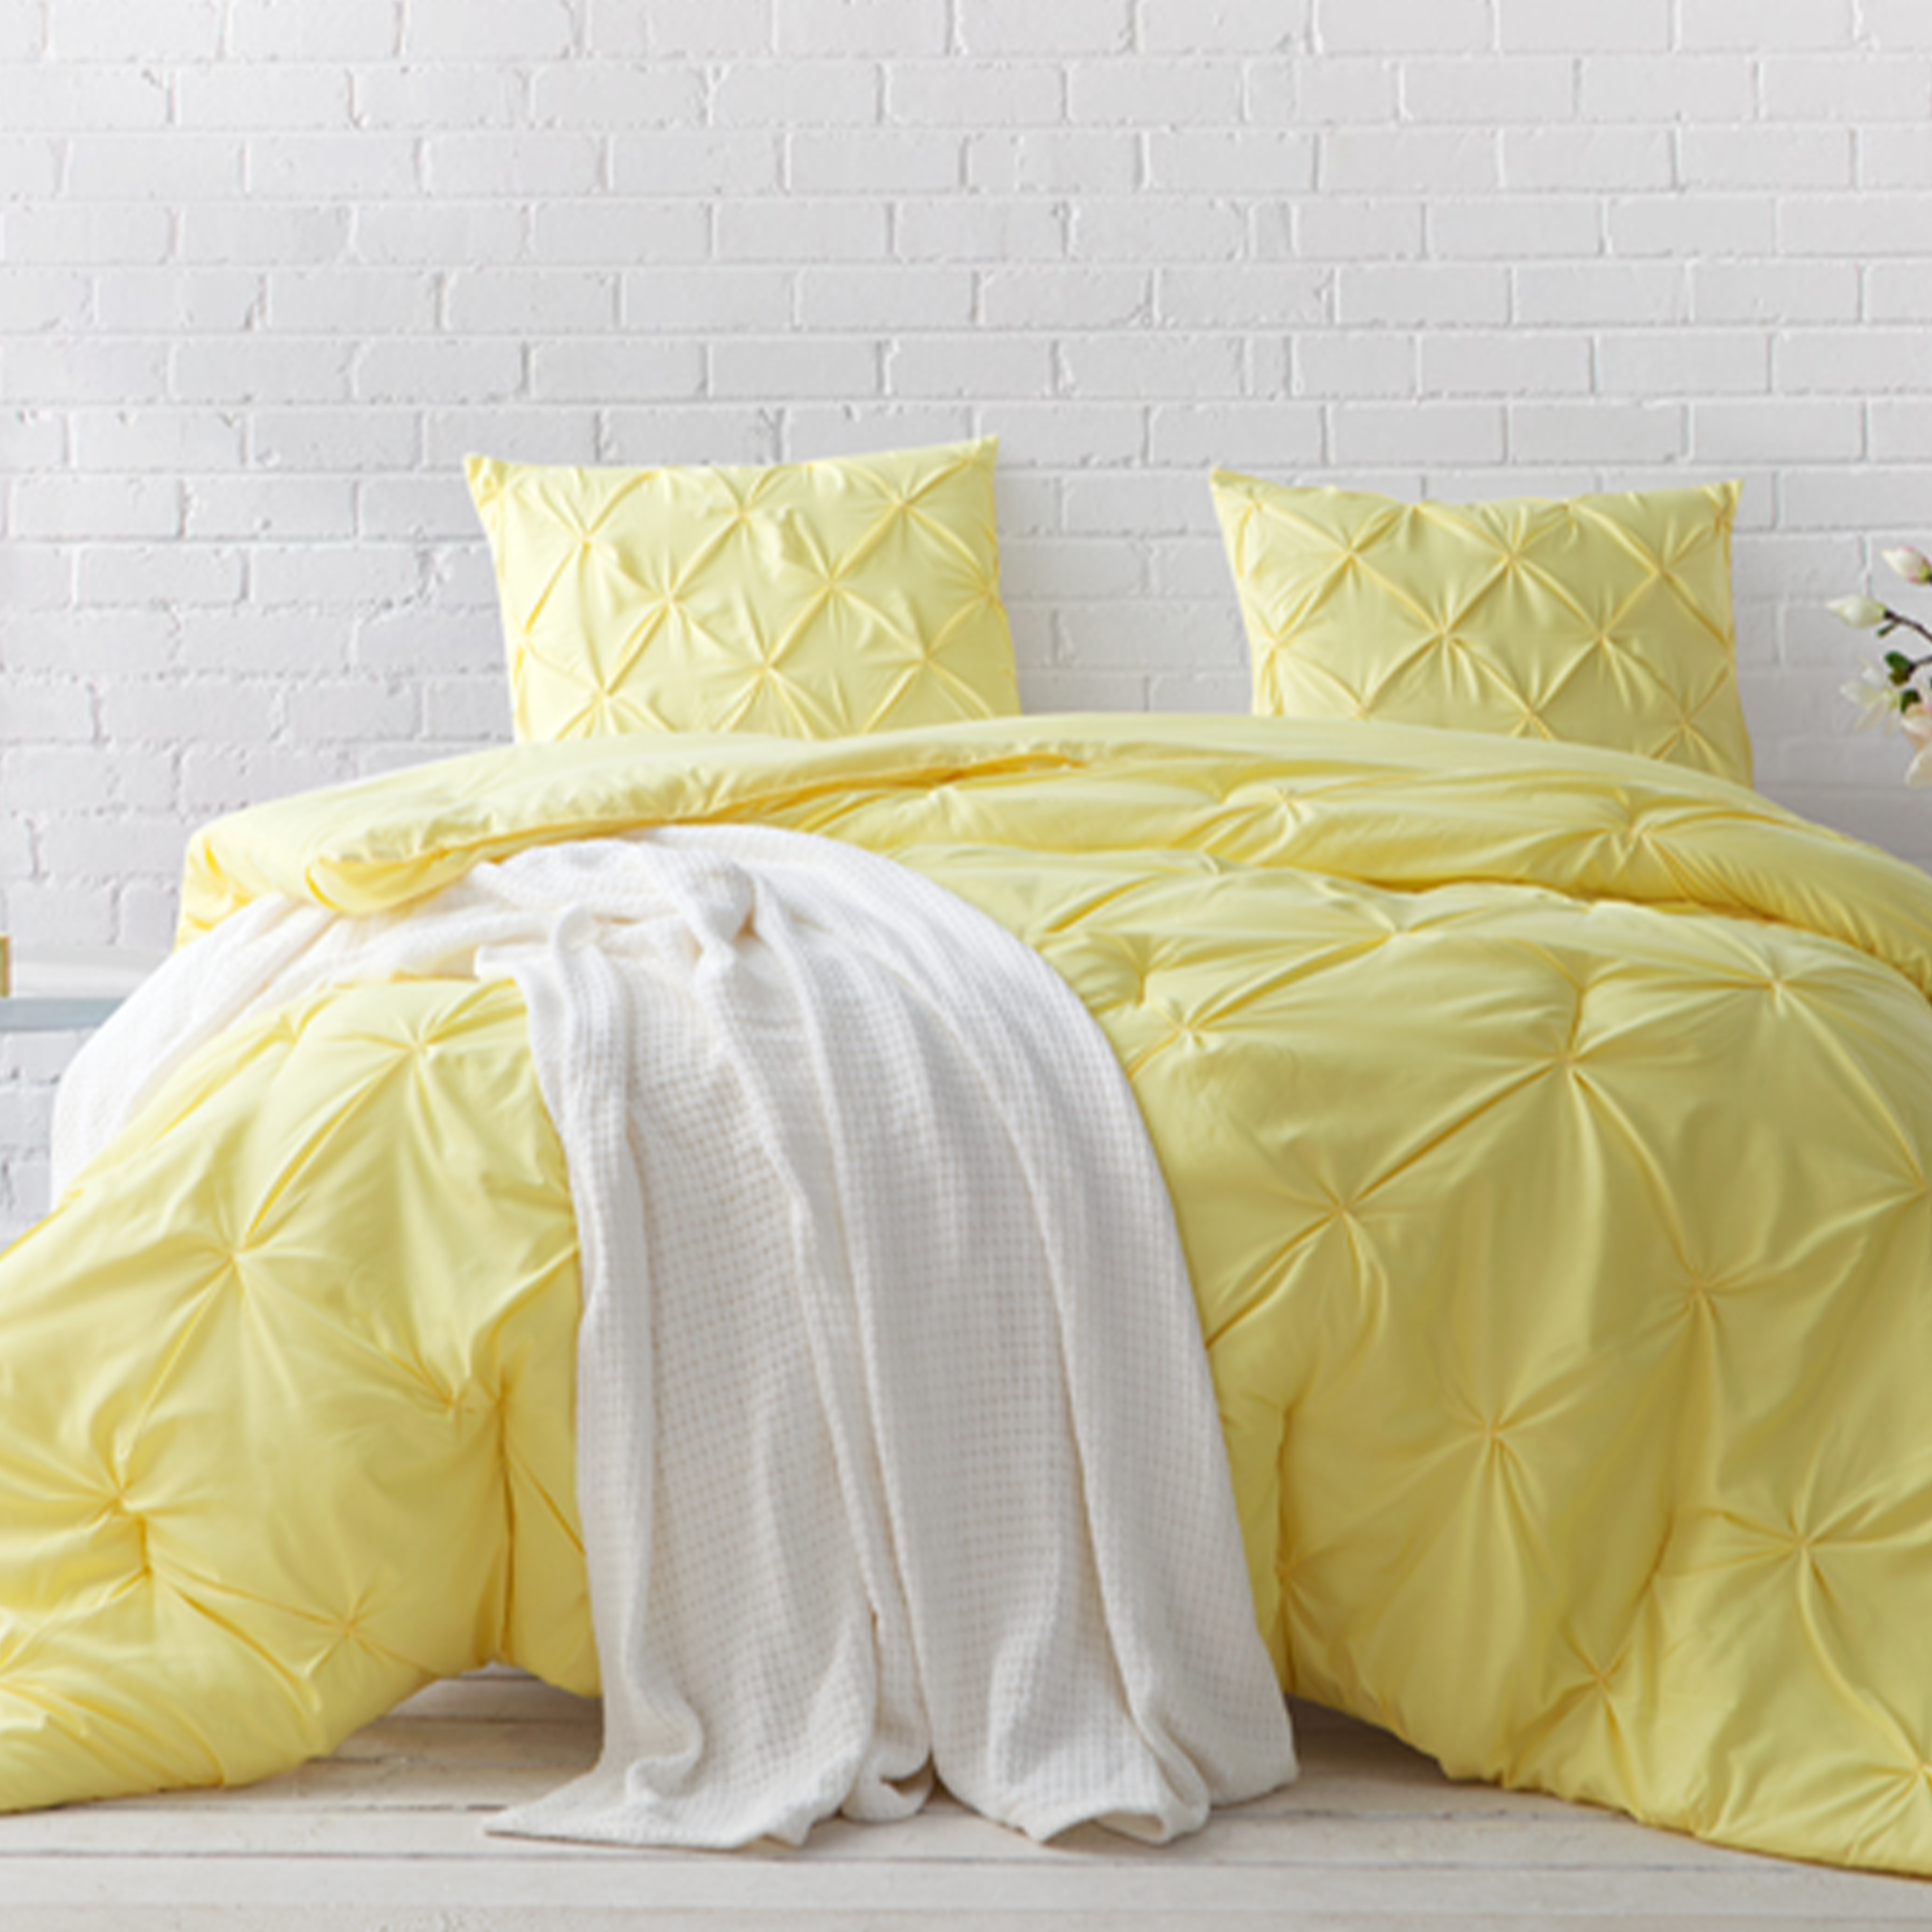 Beautiful Yellow Queen Oversized Comforter Set with Trendy Pin Tuck Queen Oversized Bedspread and Matching Standard Size Pillow Shams